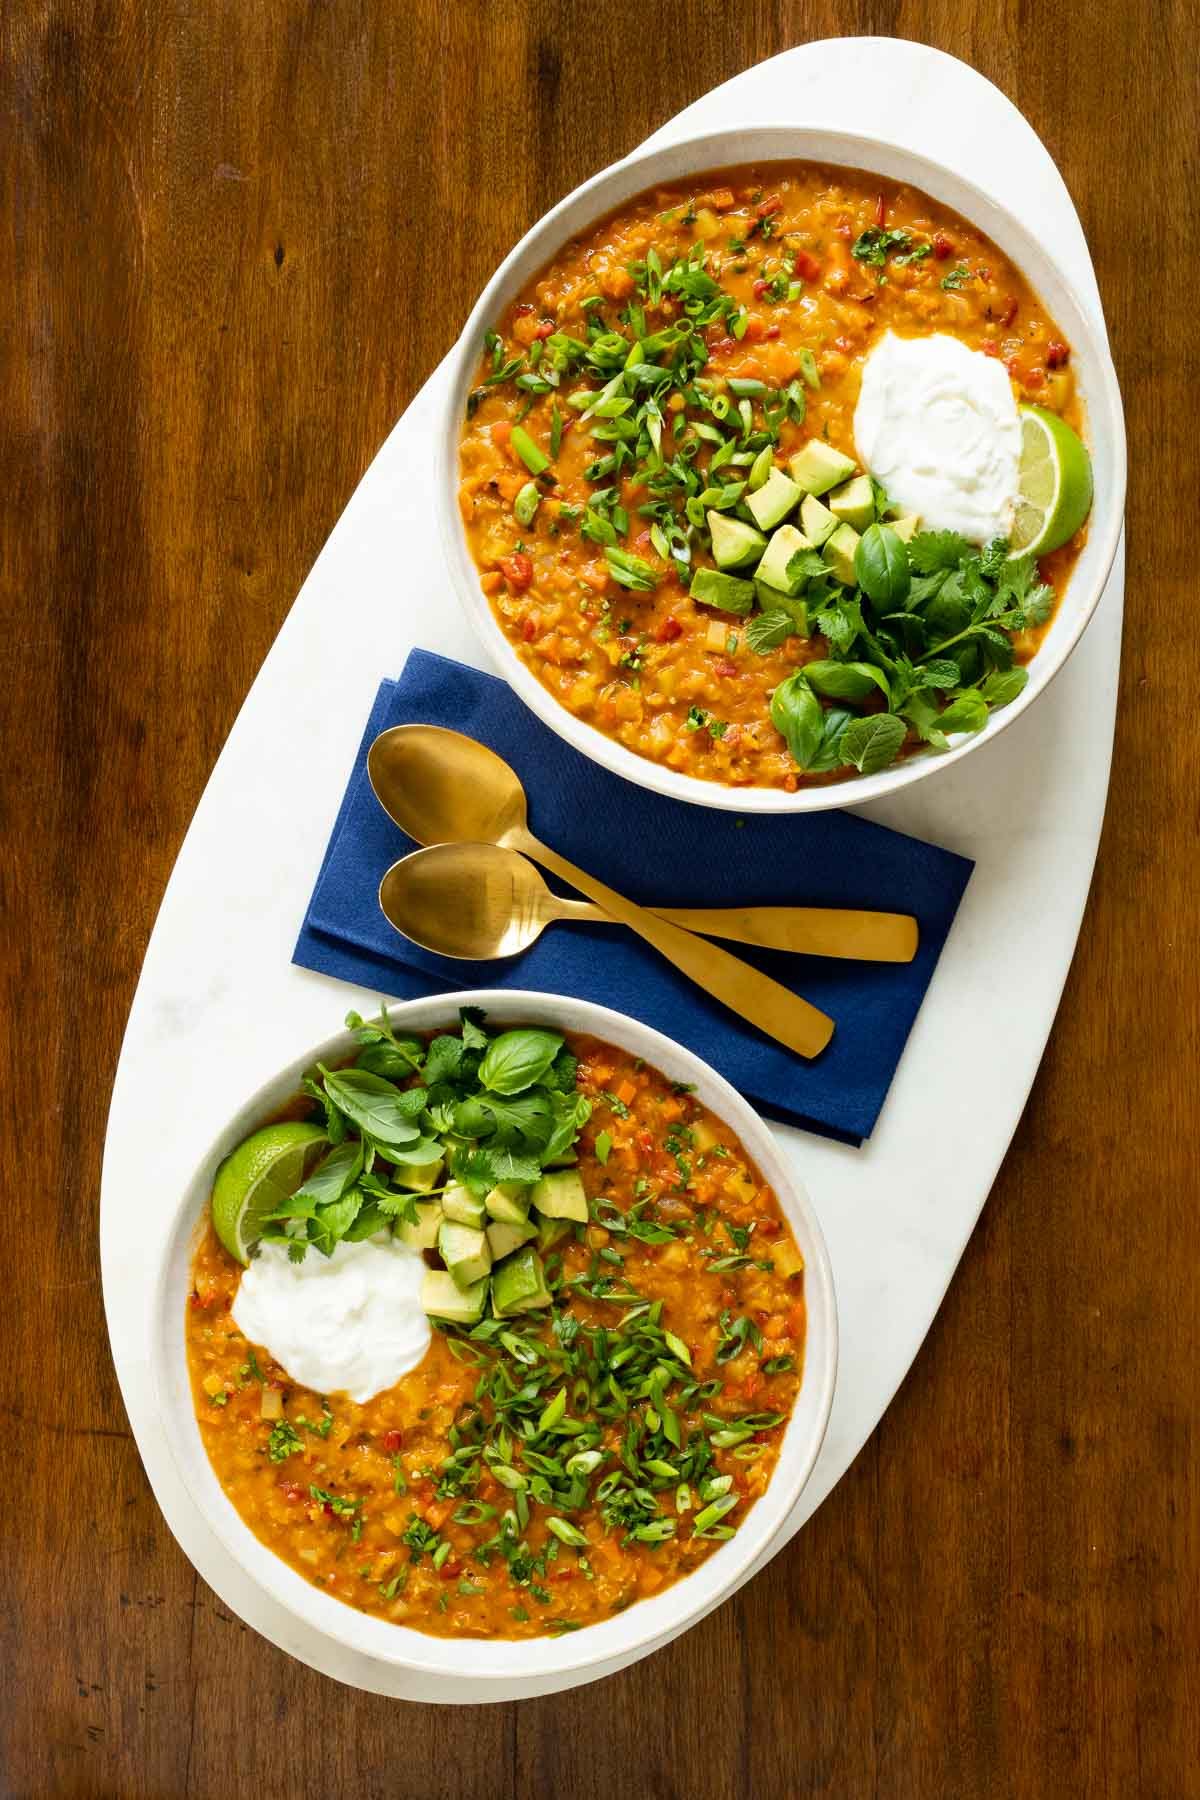 Vertical overhead photo of two white serving bowls of Curried Red Lentil Coconut Soup garnished with avocados, sliced green onions, lime wedges, and fresh cilantro and basil leaves.